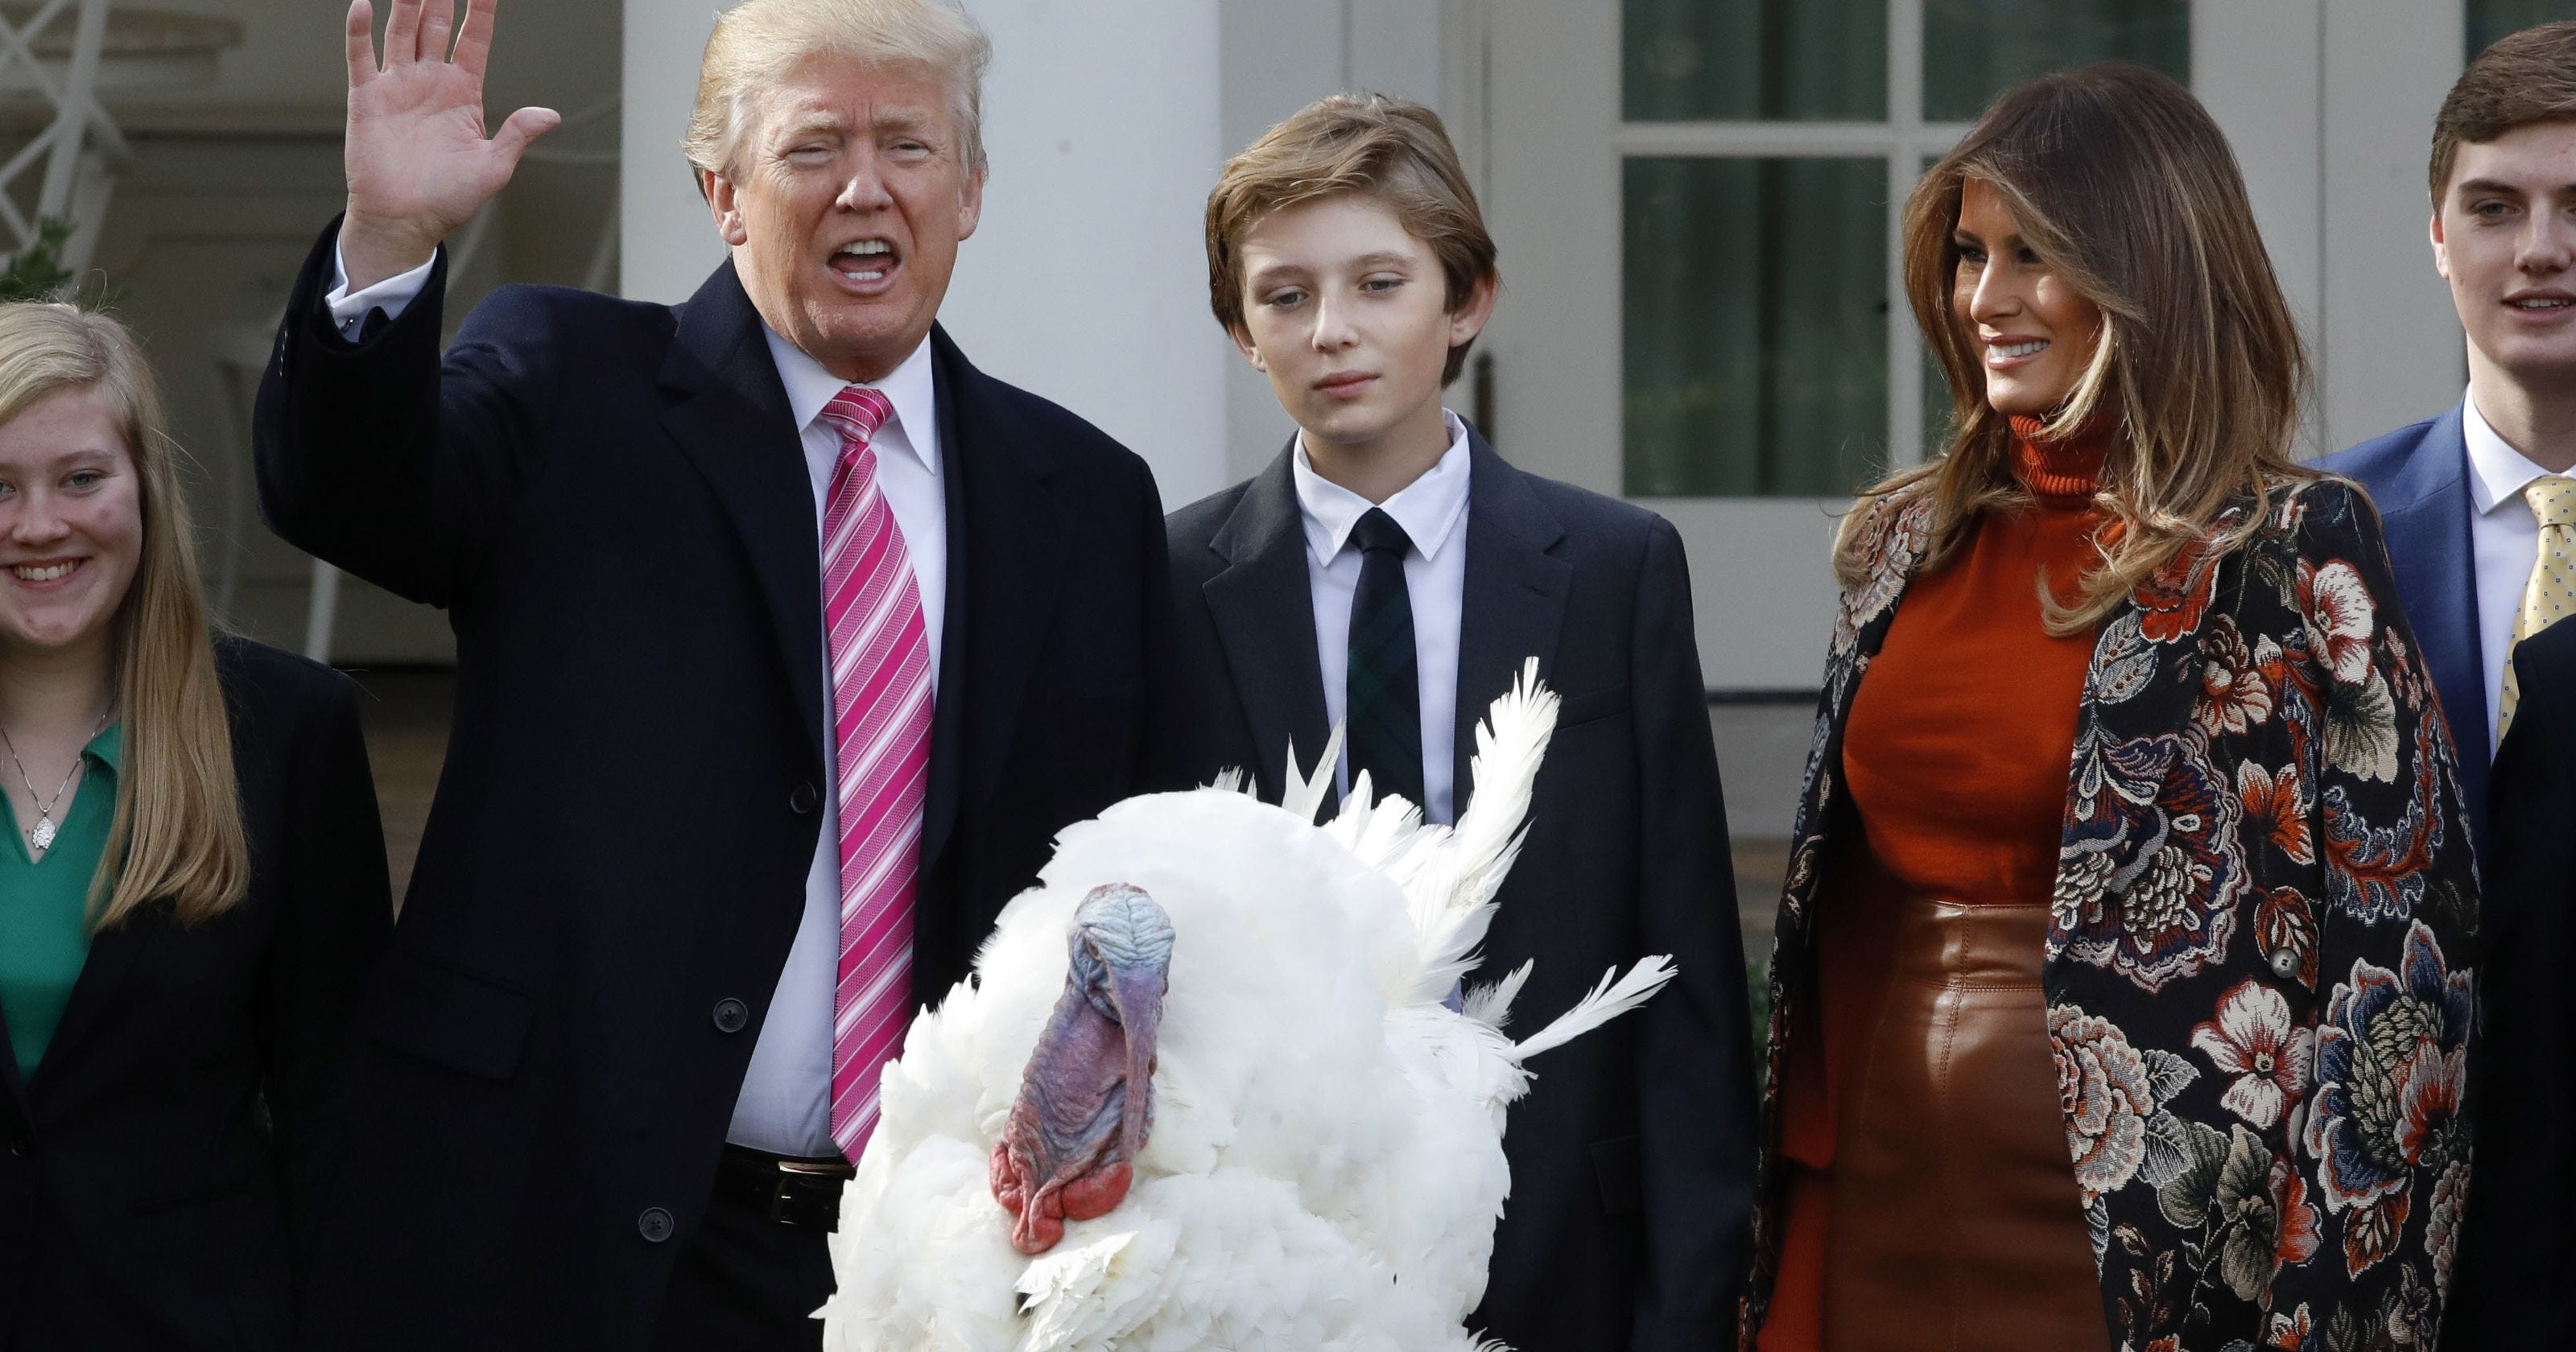 Trump Thanksgiving Turkey
 Barron Trump in the spotlight for holidays at White House